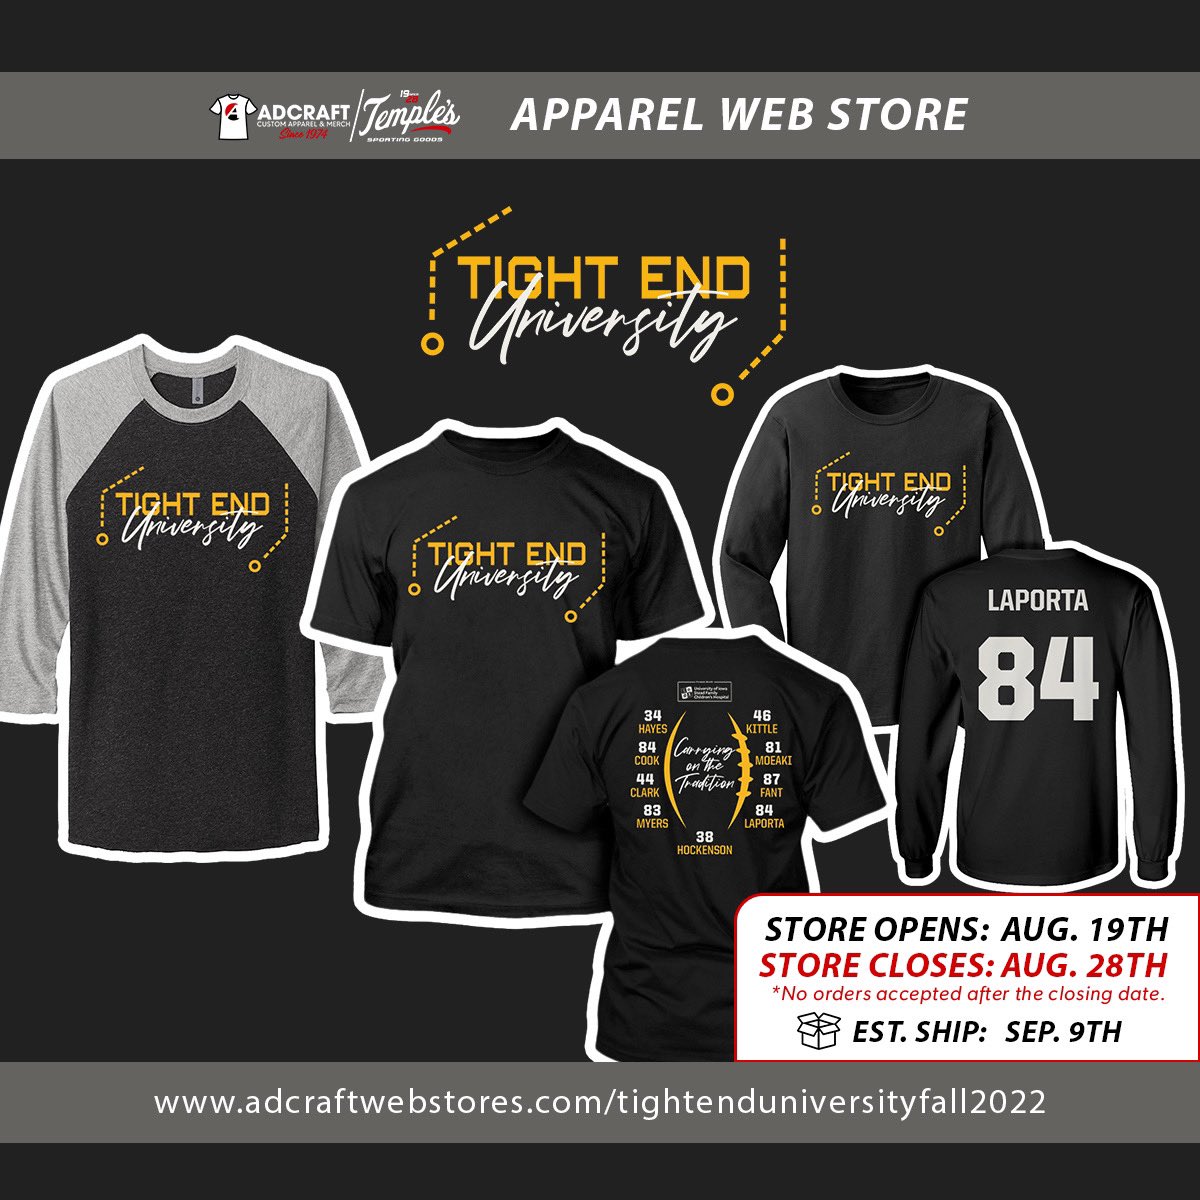 Hey Hawkeye fans! I’ve teamed up with fellow Iowa TE’s to create Tight End Univeristy merchandise in support of the UI Stead Family Children’s hospital. The online store will open this Friday the 19th. 100% of the proceeds will be donated. Thanks for your support! Go hawks!